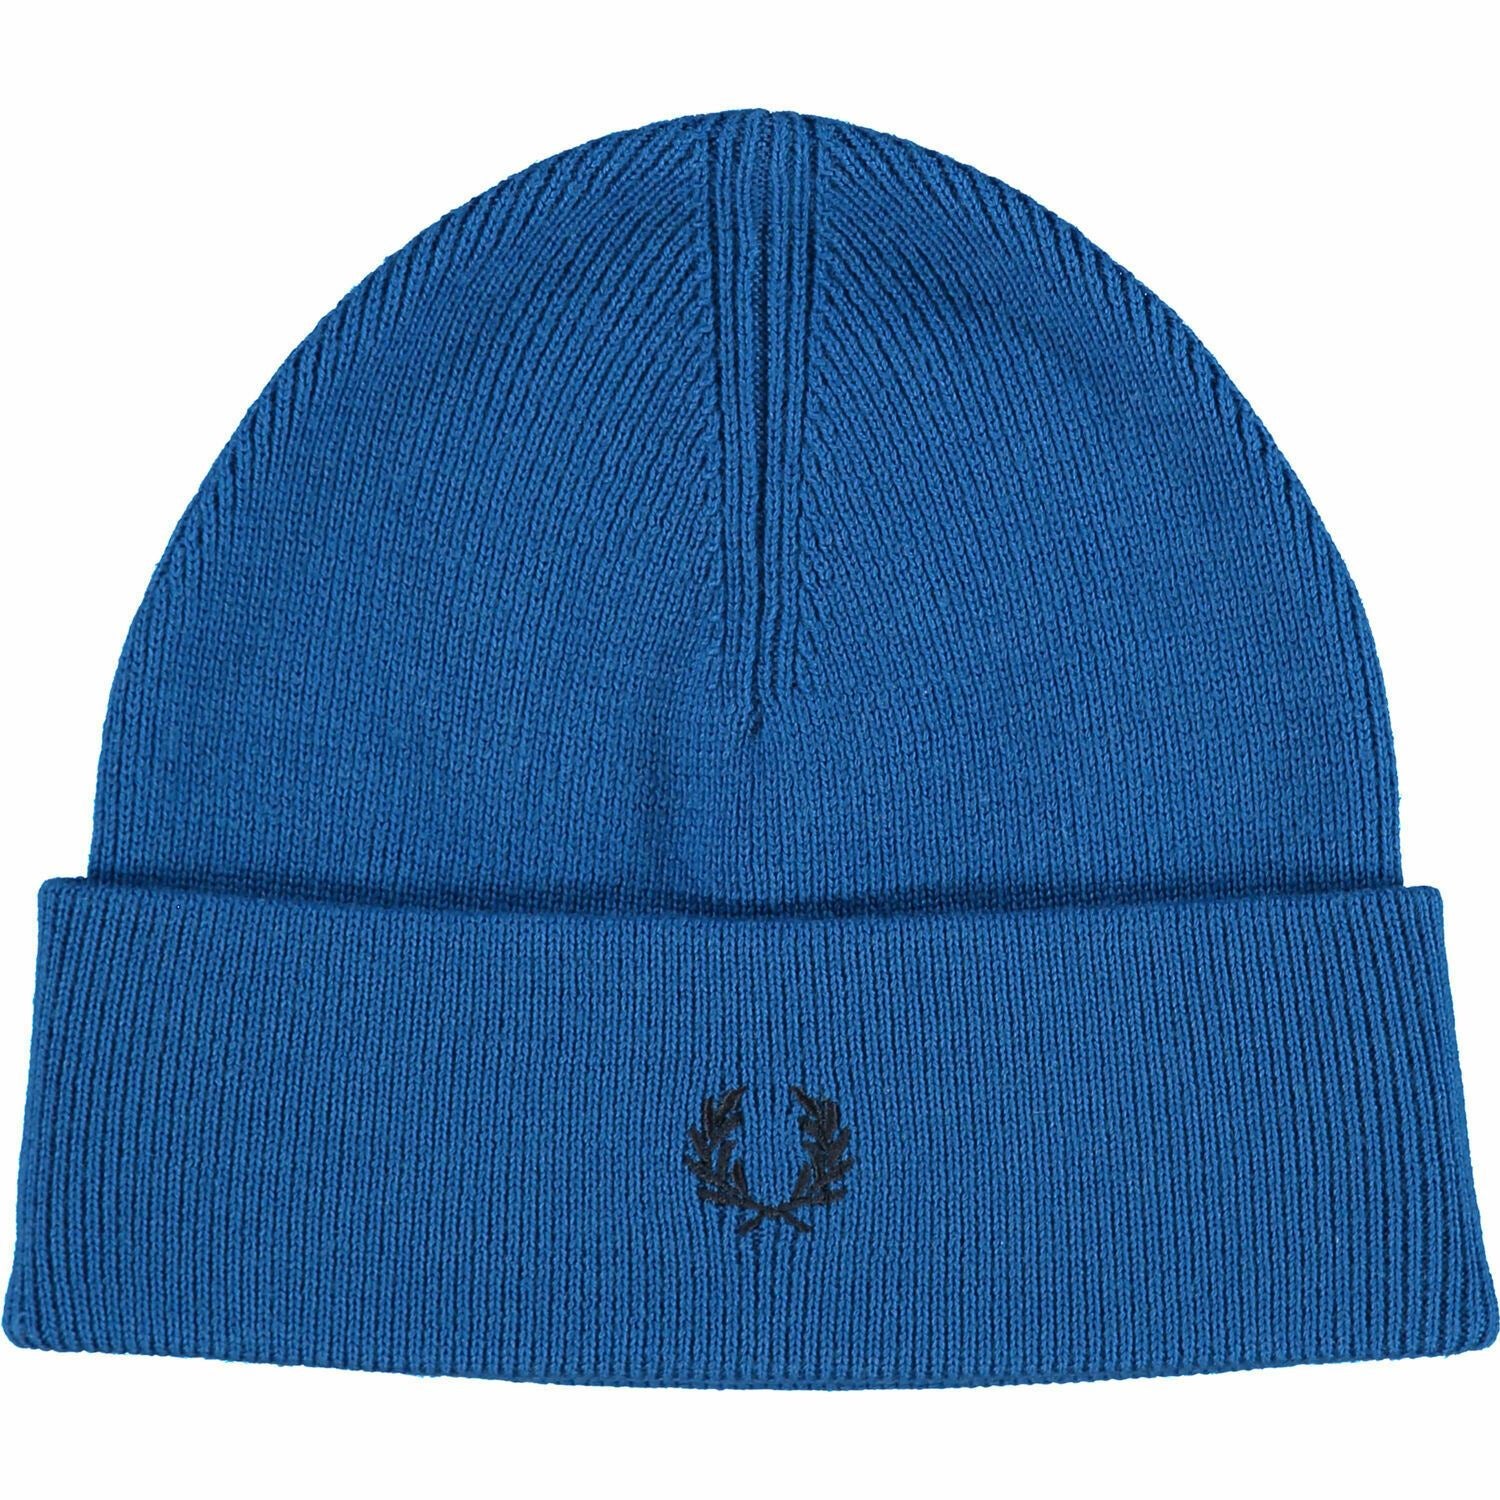 FRED PERRY Menâs Rib Knit 100% Wool Logo Beanie Hat, Mid Blue